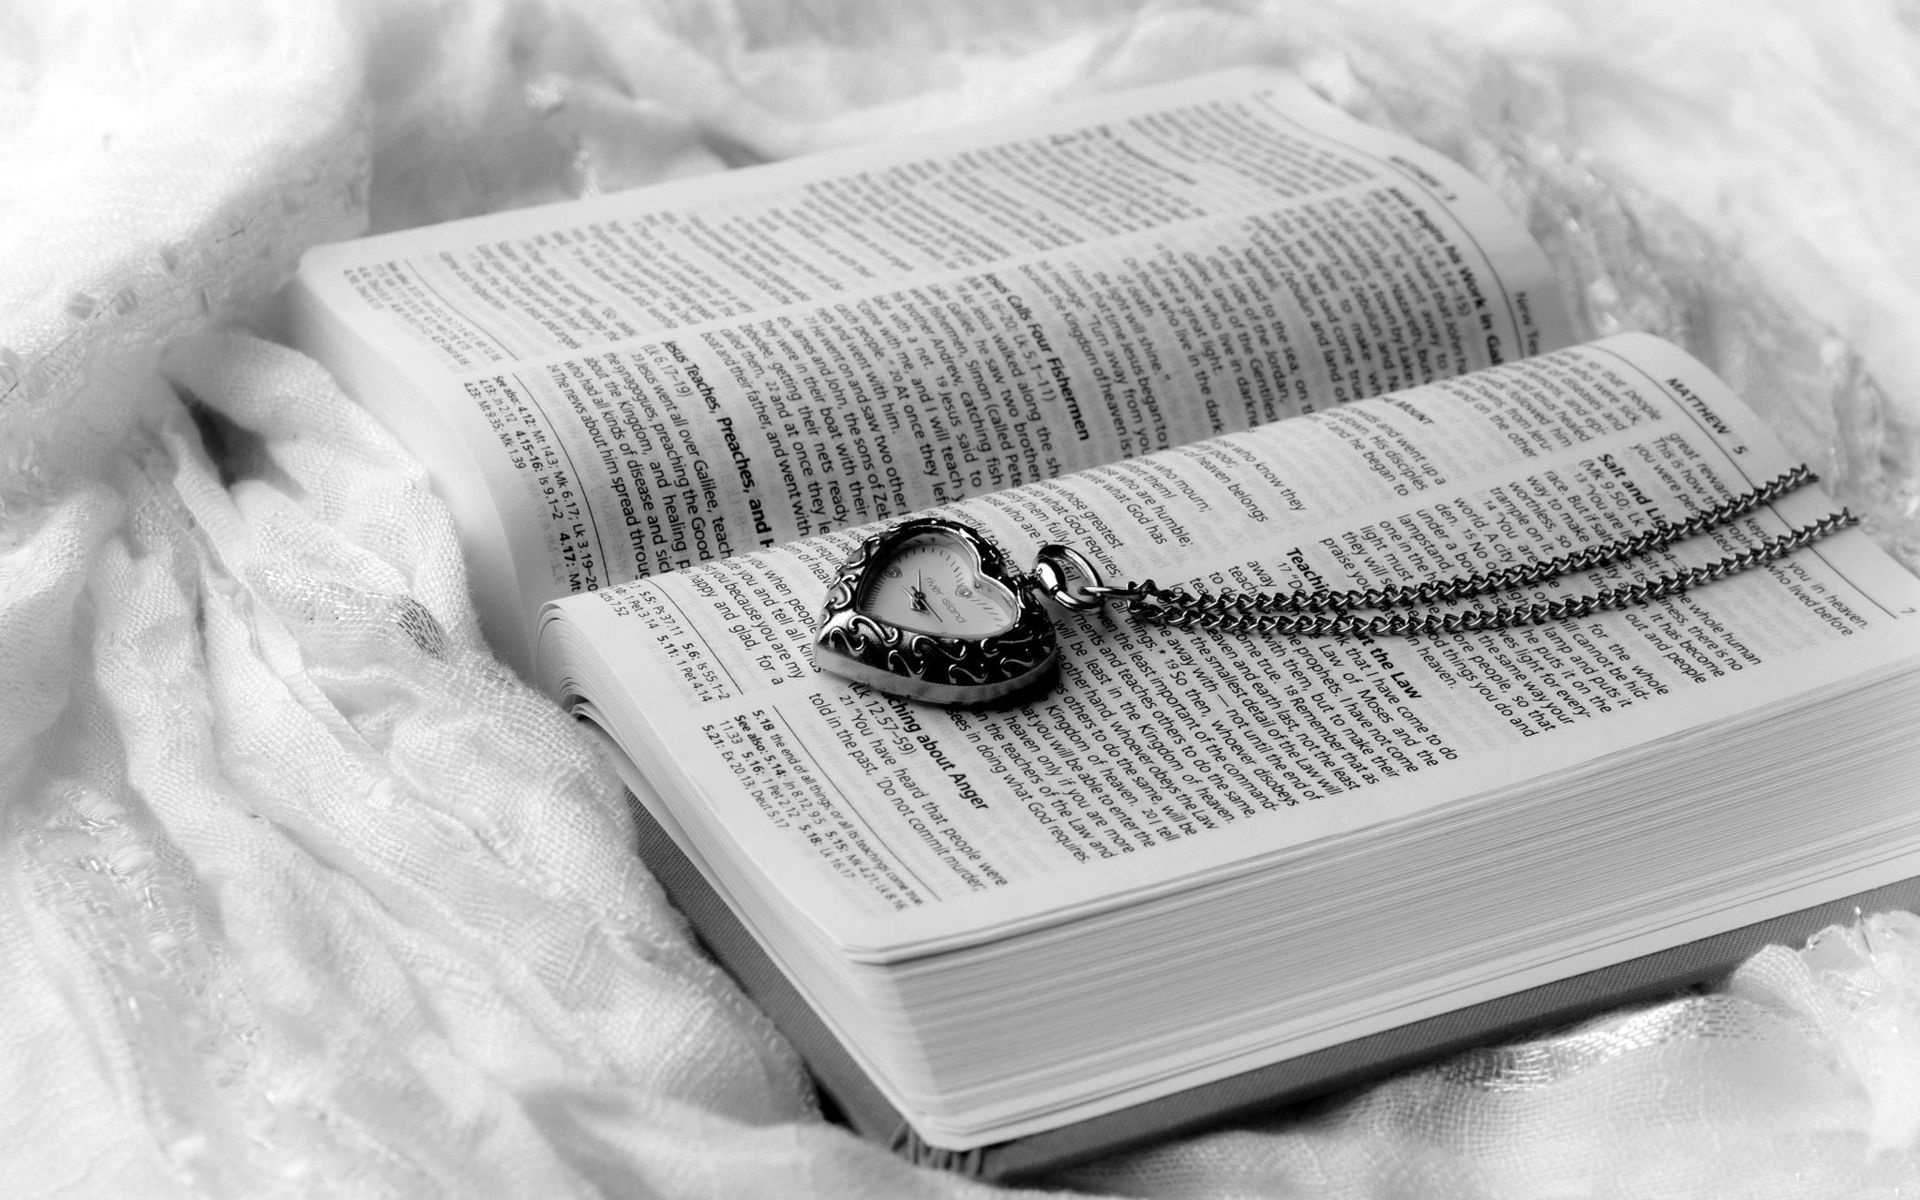 Heart book pendant, Top free backgrounds, Romantic accessory, Vintage-inspired, 1920x1200 HD Desktop